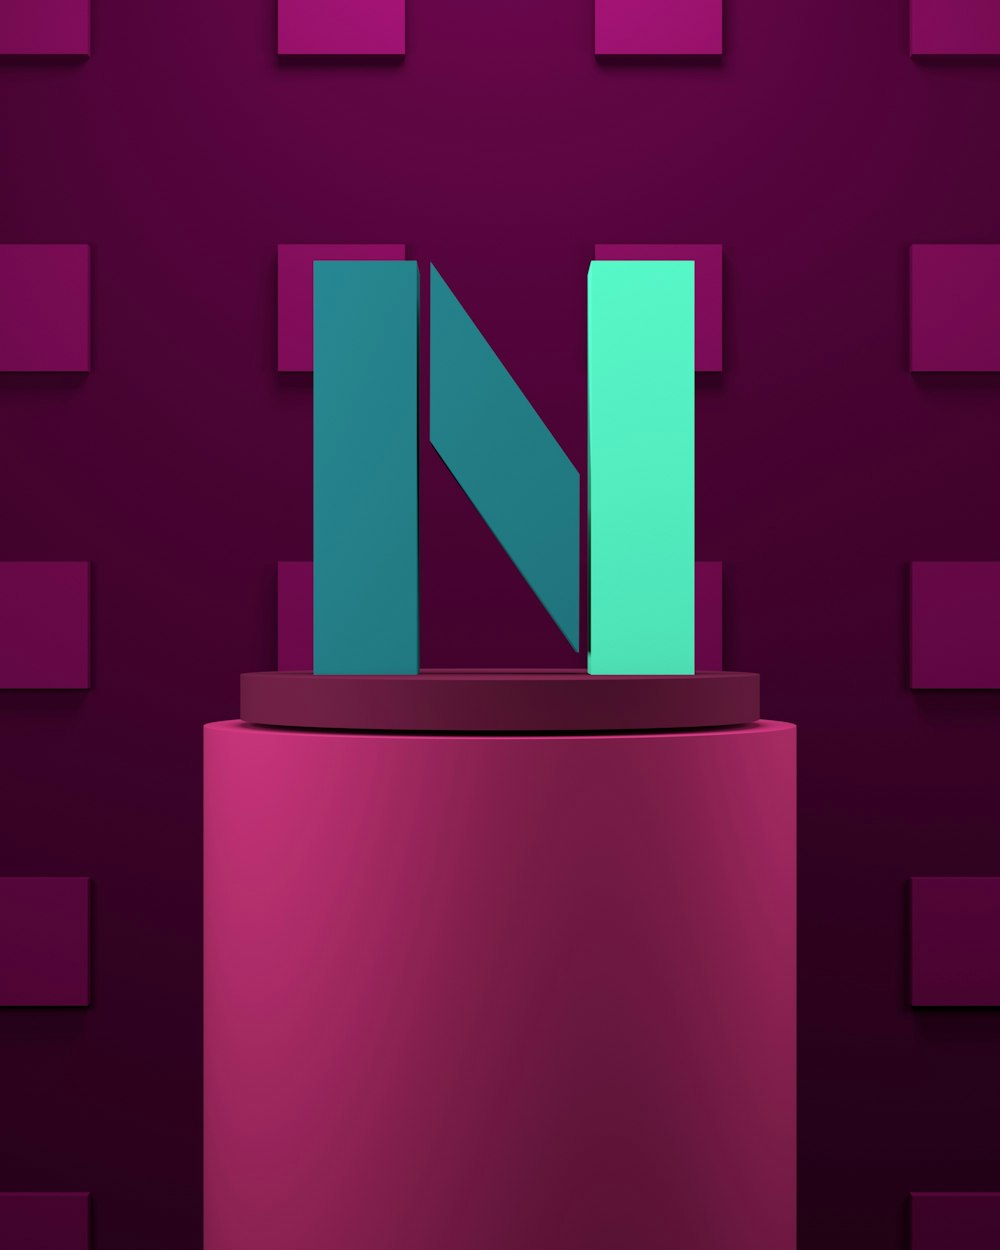 a purple background with a blue and green object on top of it